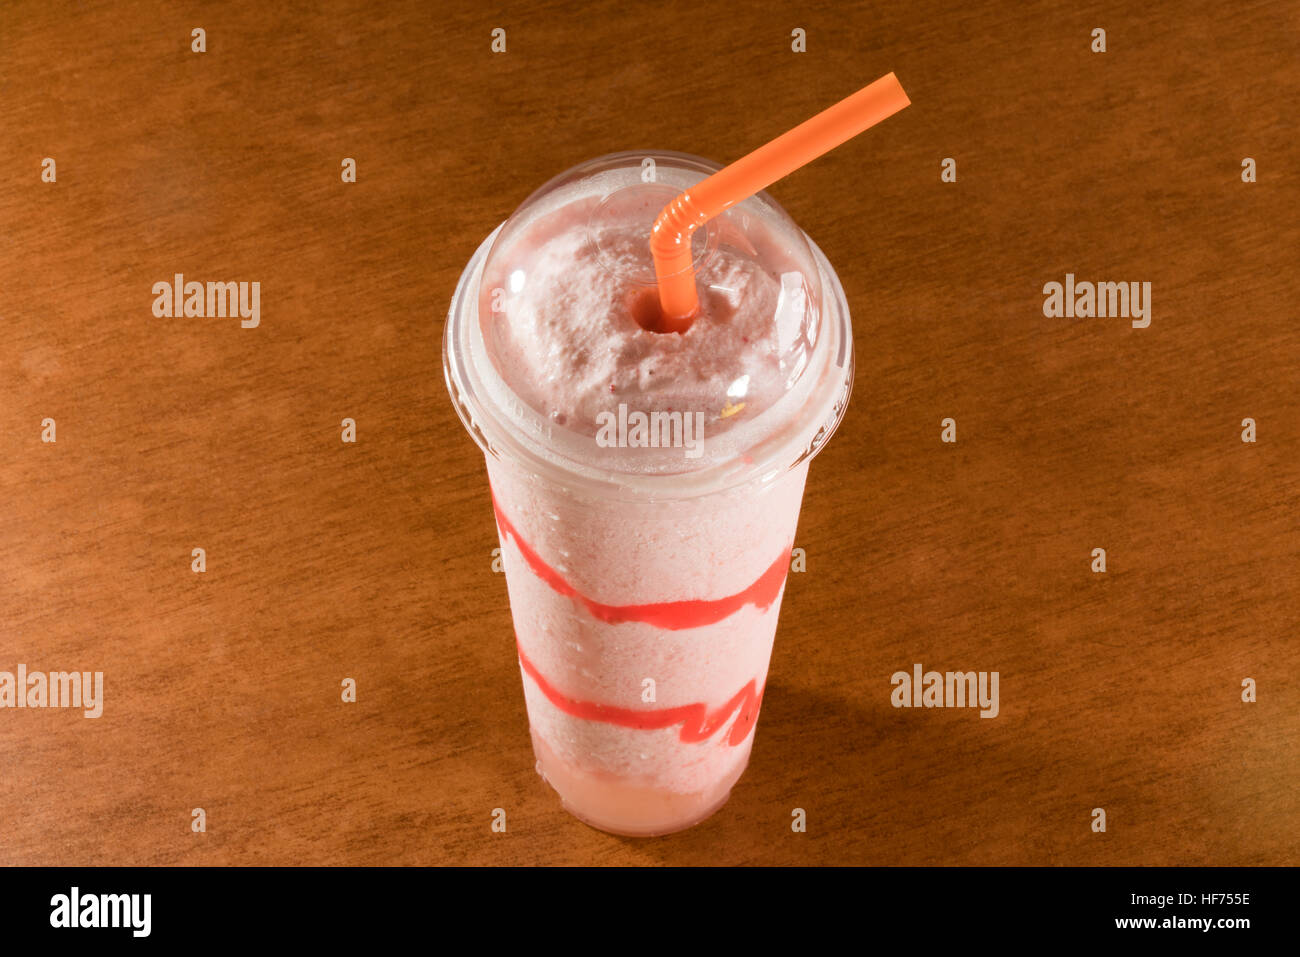 Fresh strawberry smoothie in plastic cup on ceramic floor tile Stock Photo